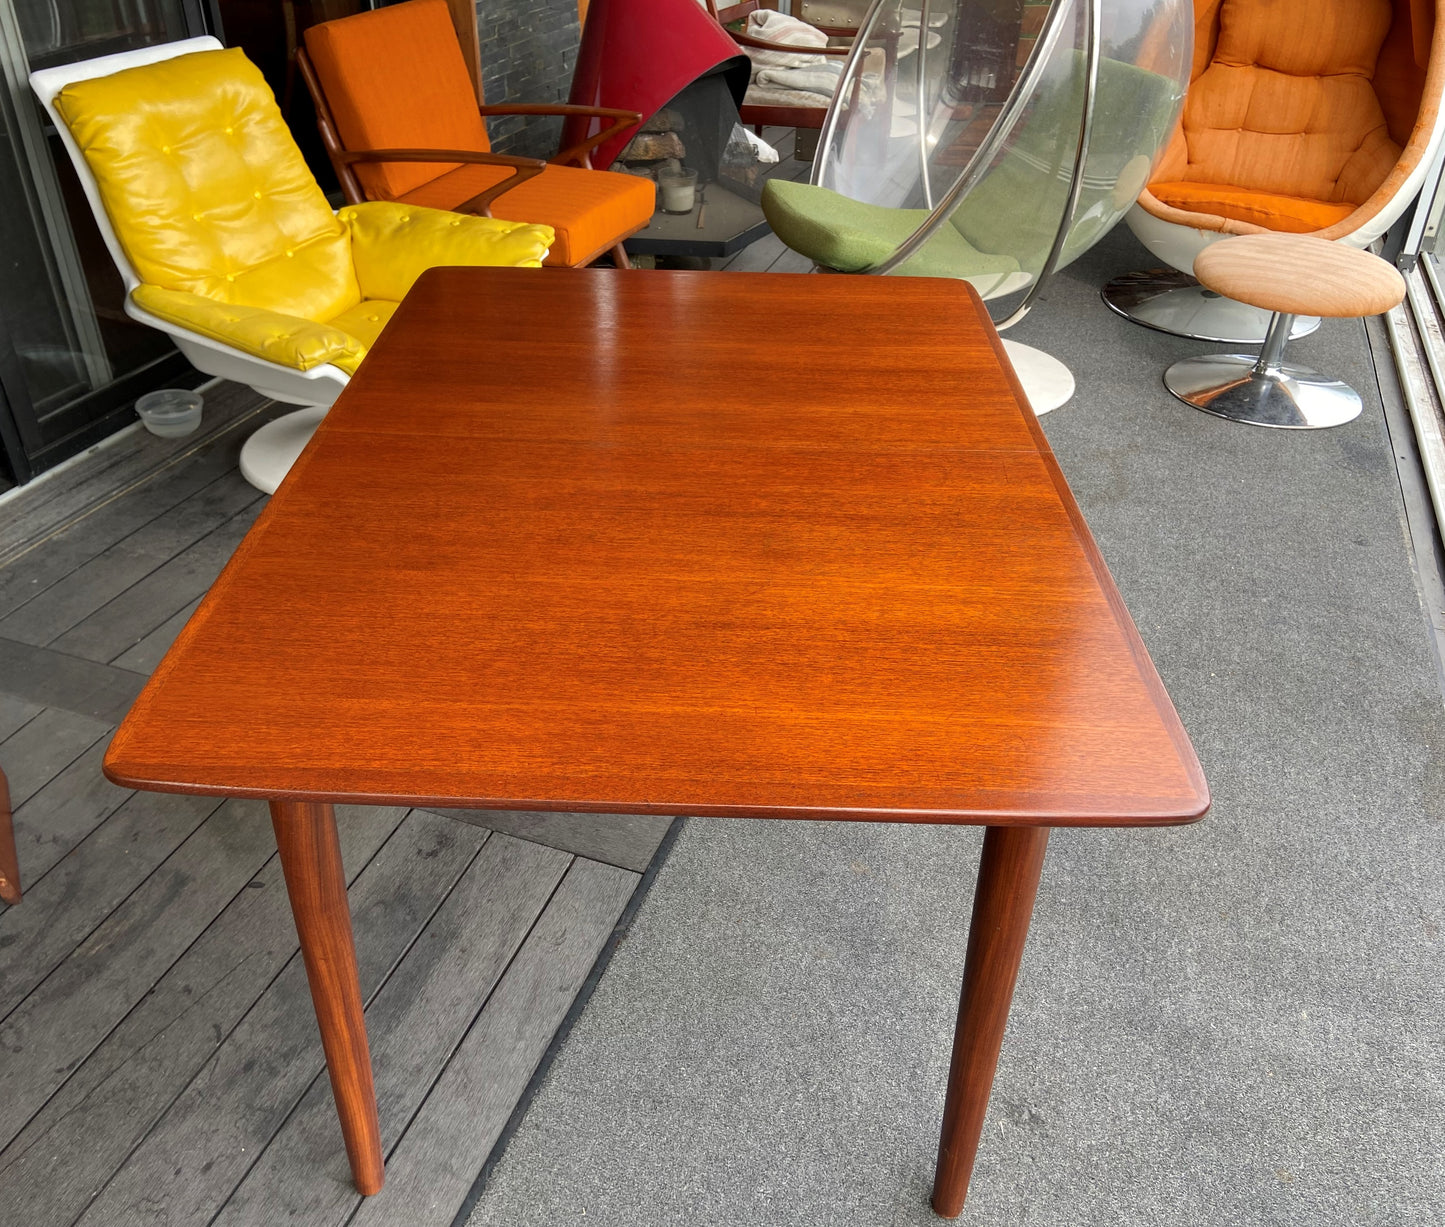 REFINISHED Mid Century Modern Teak Table w 3 Leaves Selfstoring by G.Bahus, Norway 51" - 85"